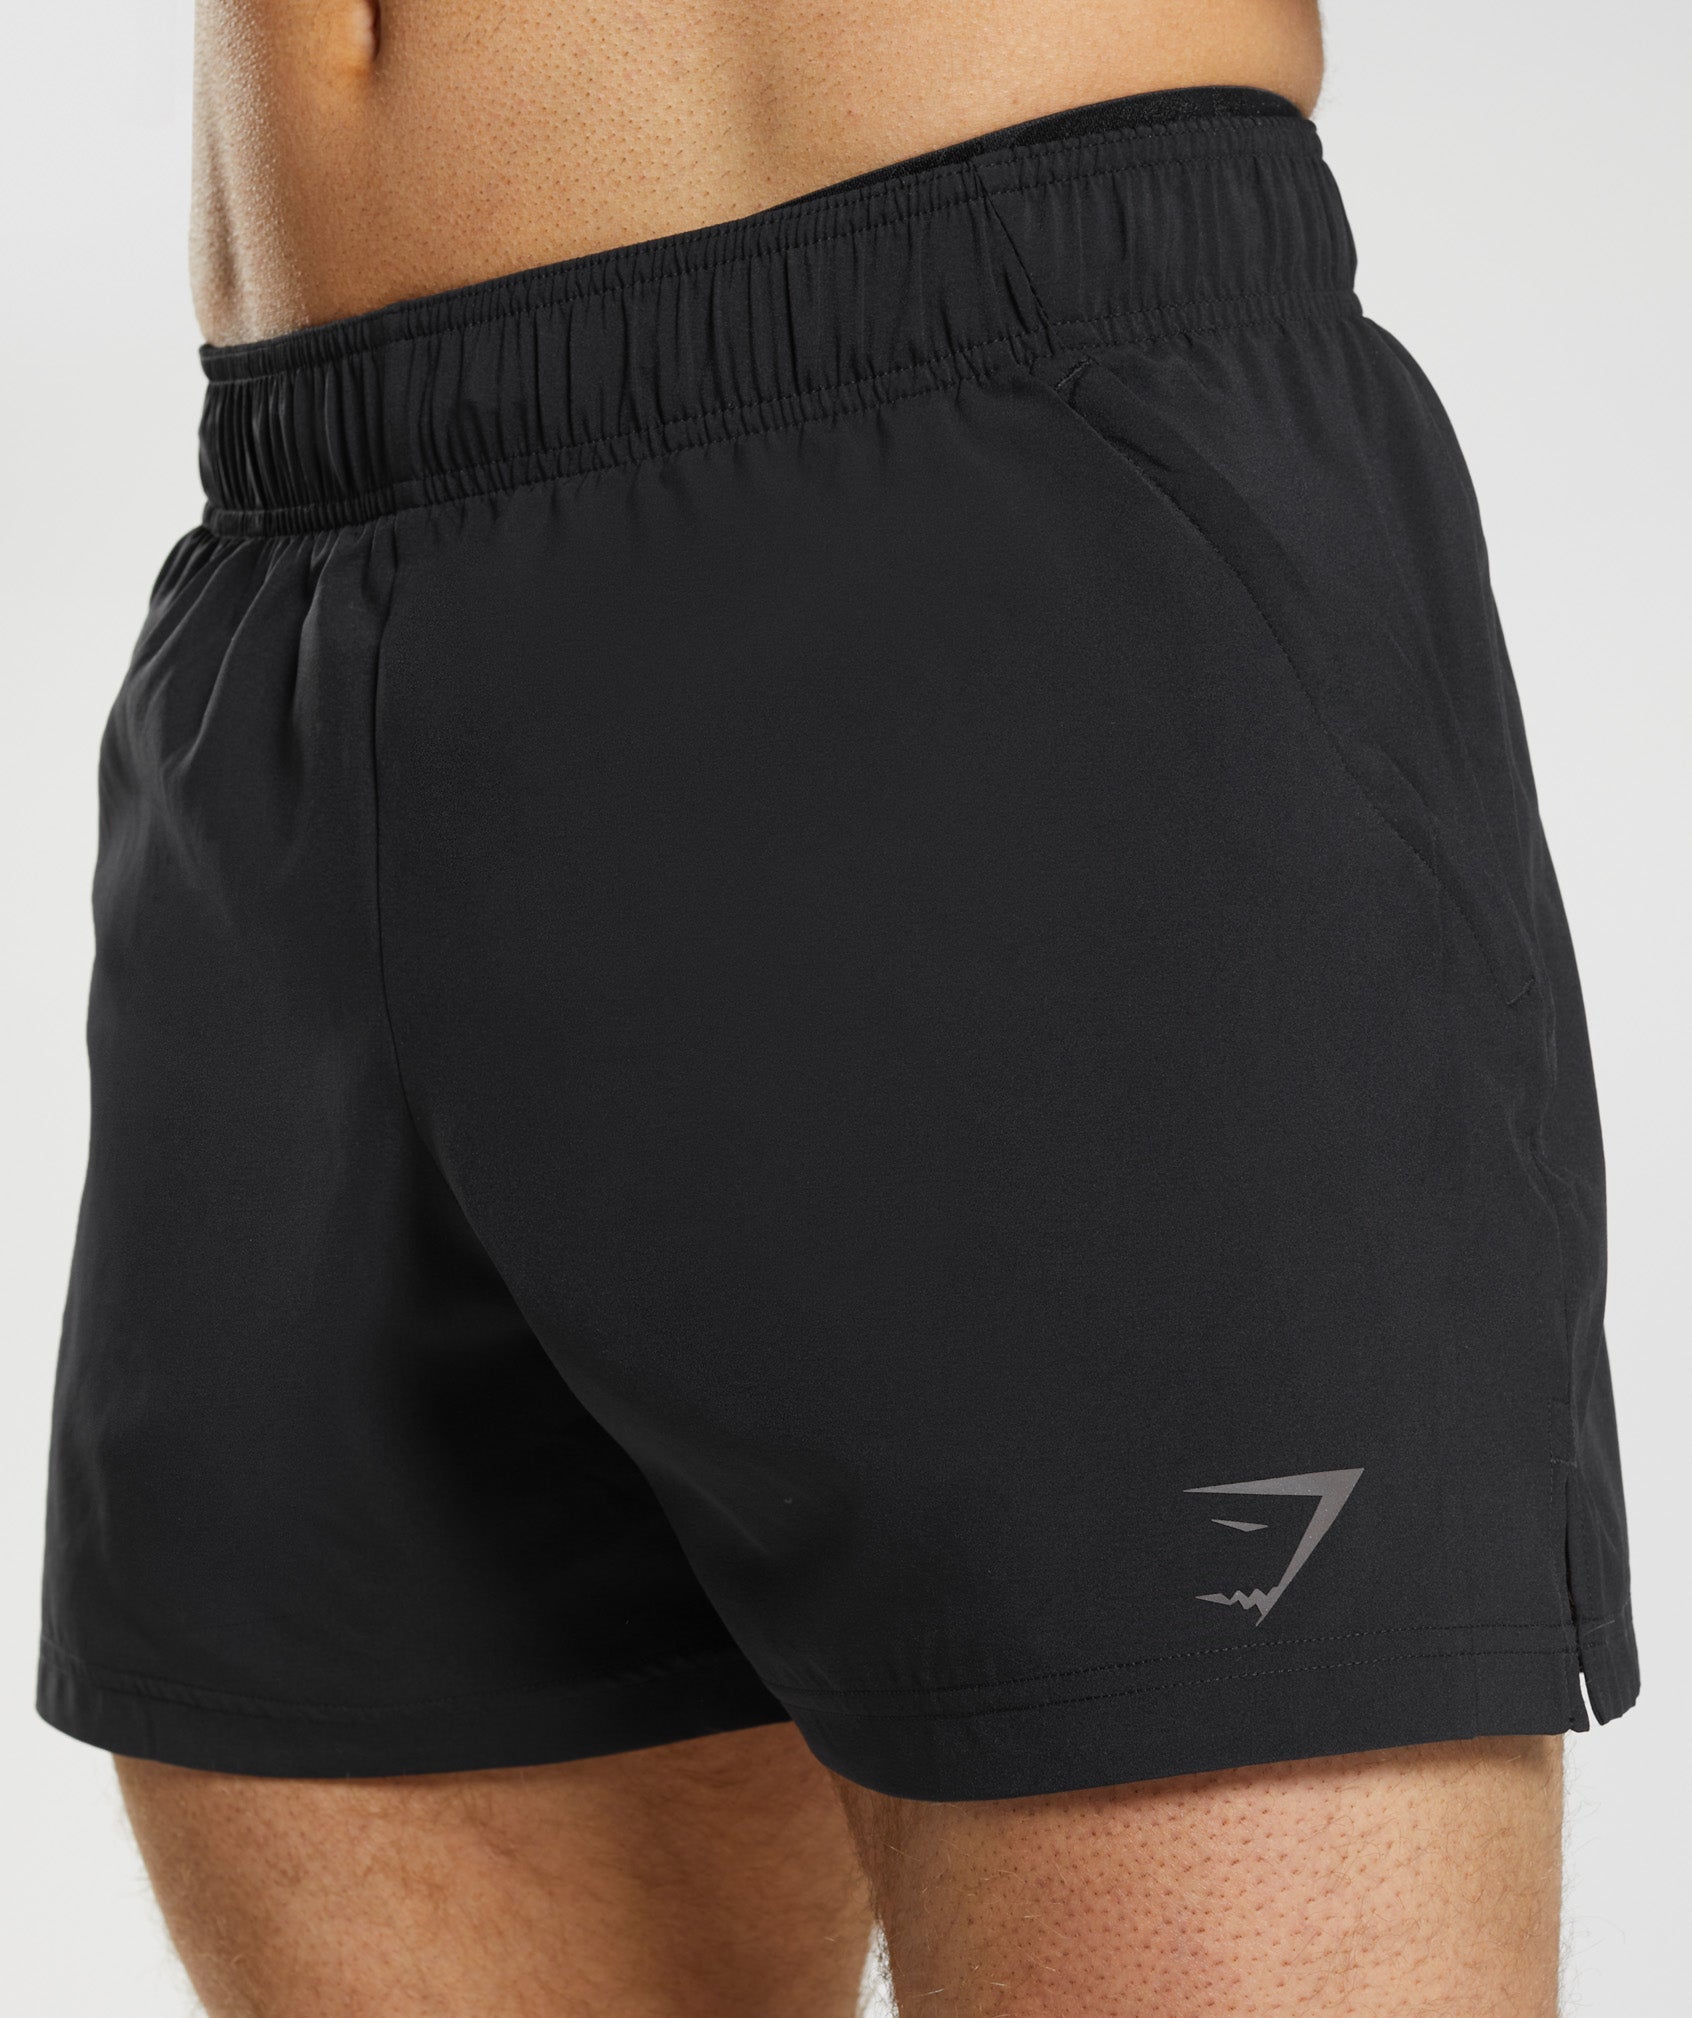 Sport 5" Shorts in Black - view 6